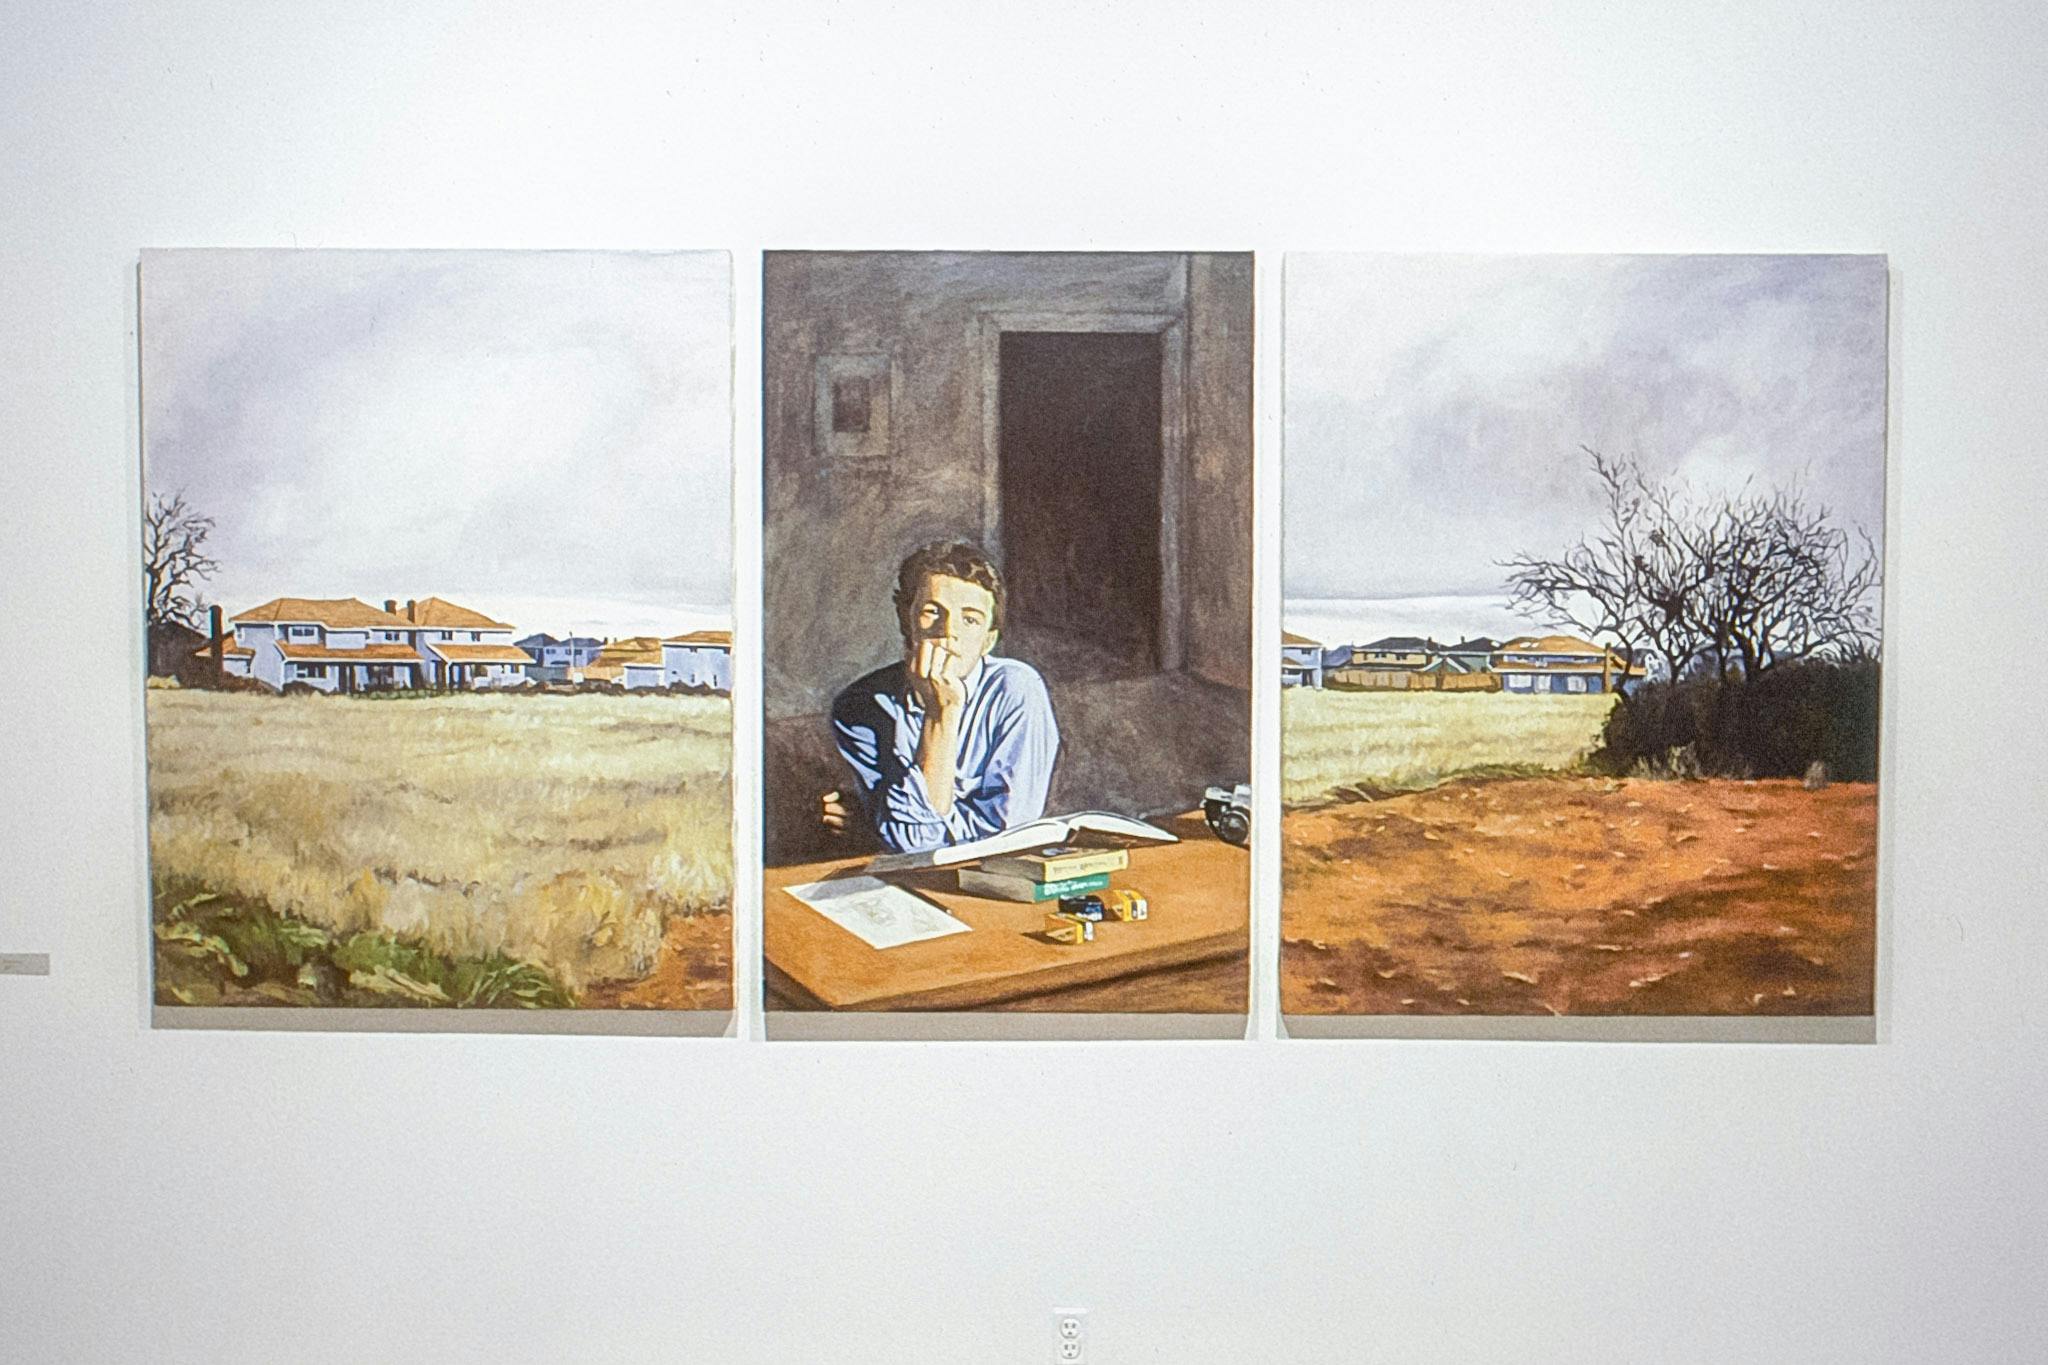 3 paintings mounted on a white wall. One shows a yellow field with houses in the background. One shows a person sitting at a desk with a book. One shows an orange field with houses in the distance. 